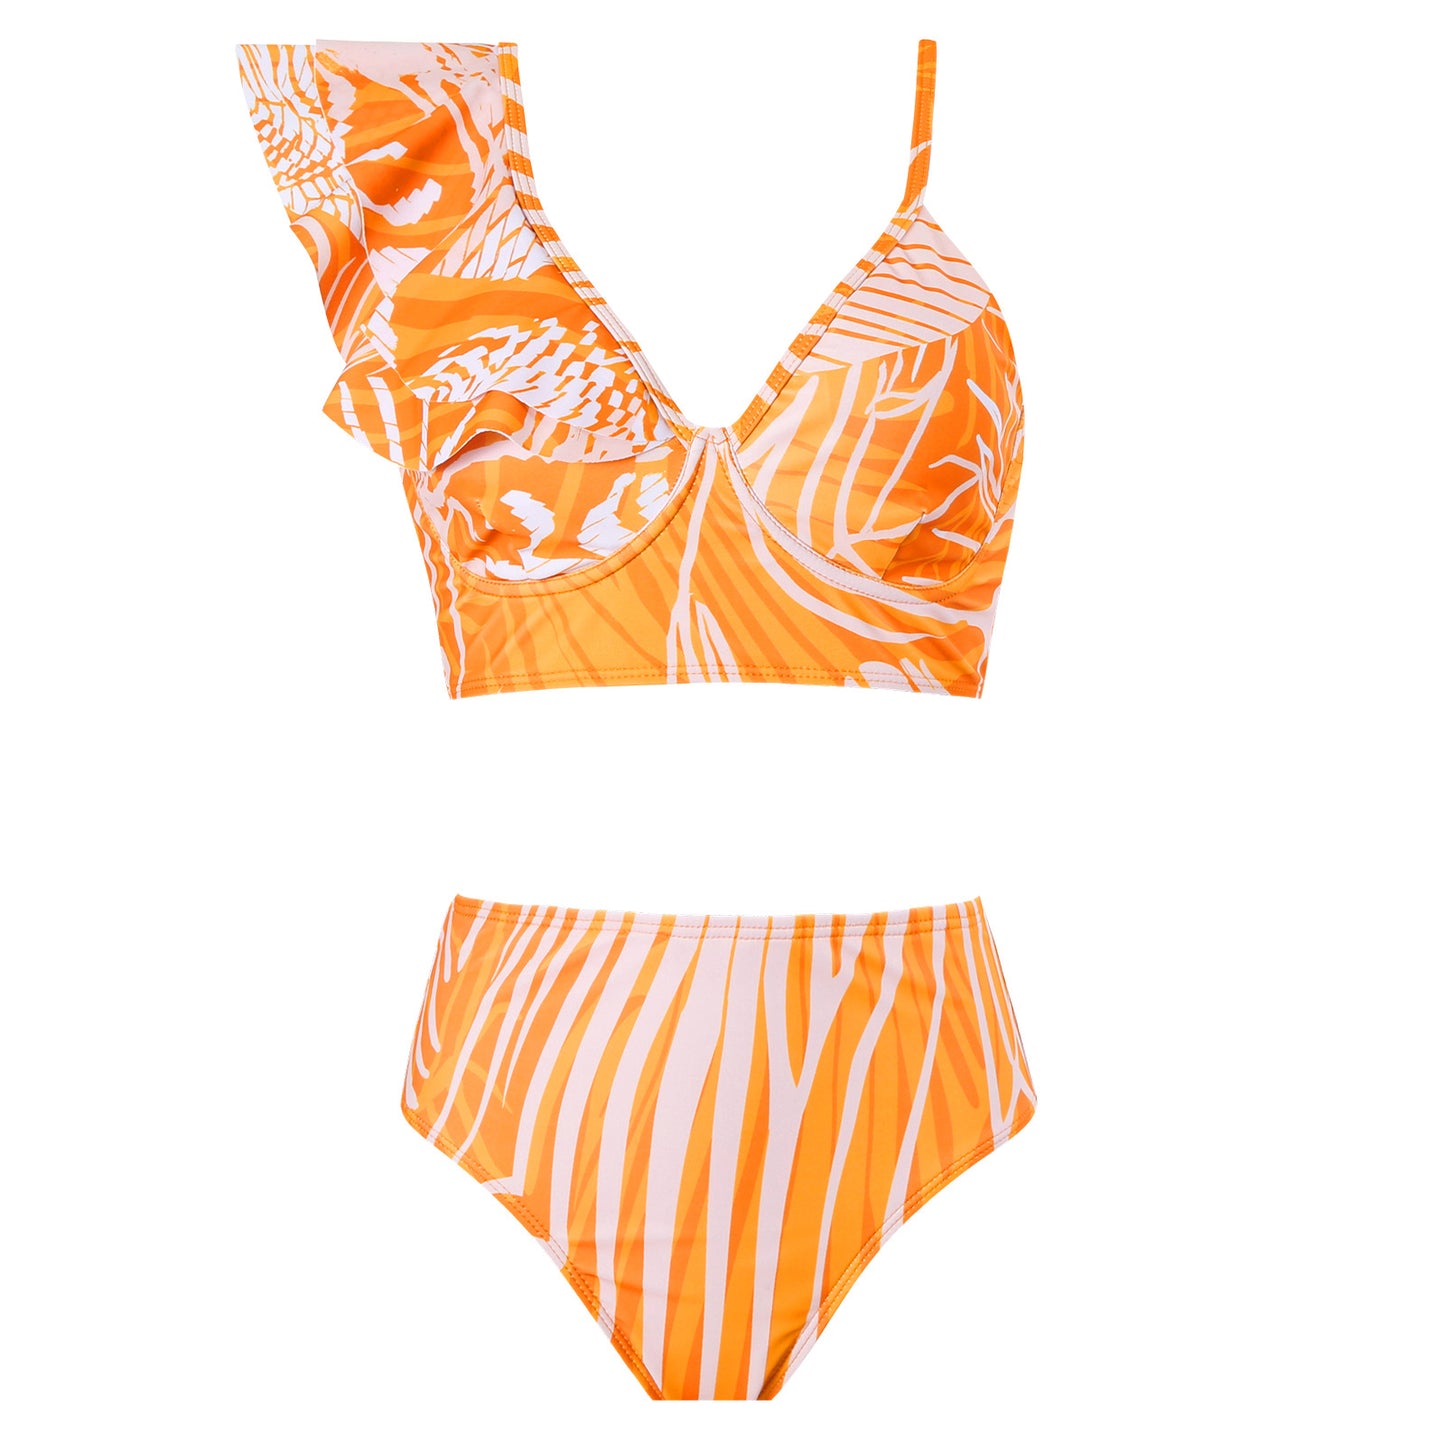 Muse De Palm Beach - Slimming Two Piece Bikini Set - With Matching Cover Up